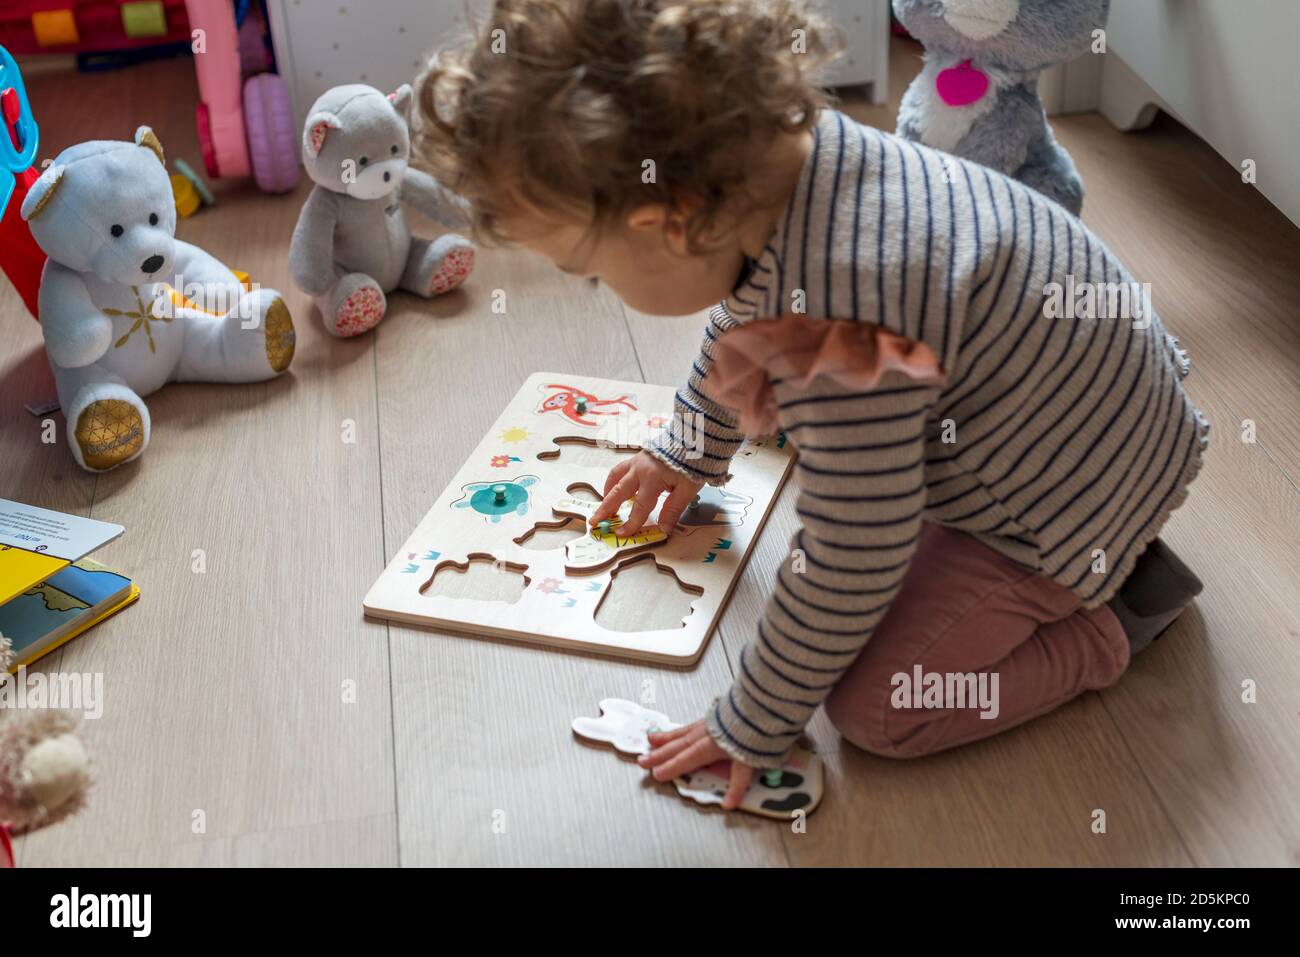 17-month child playing with a wooden jigsaw puzzle, fitting shapes of animals Stock Photo